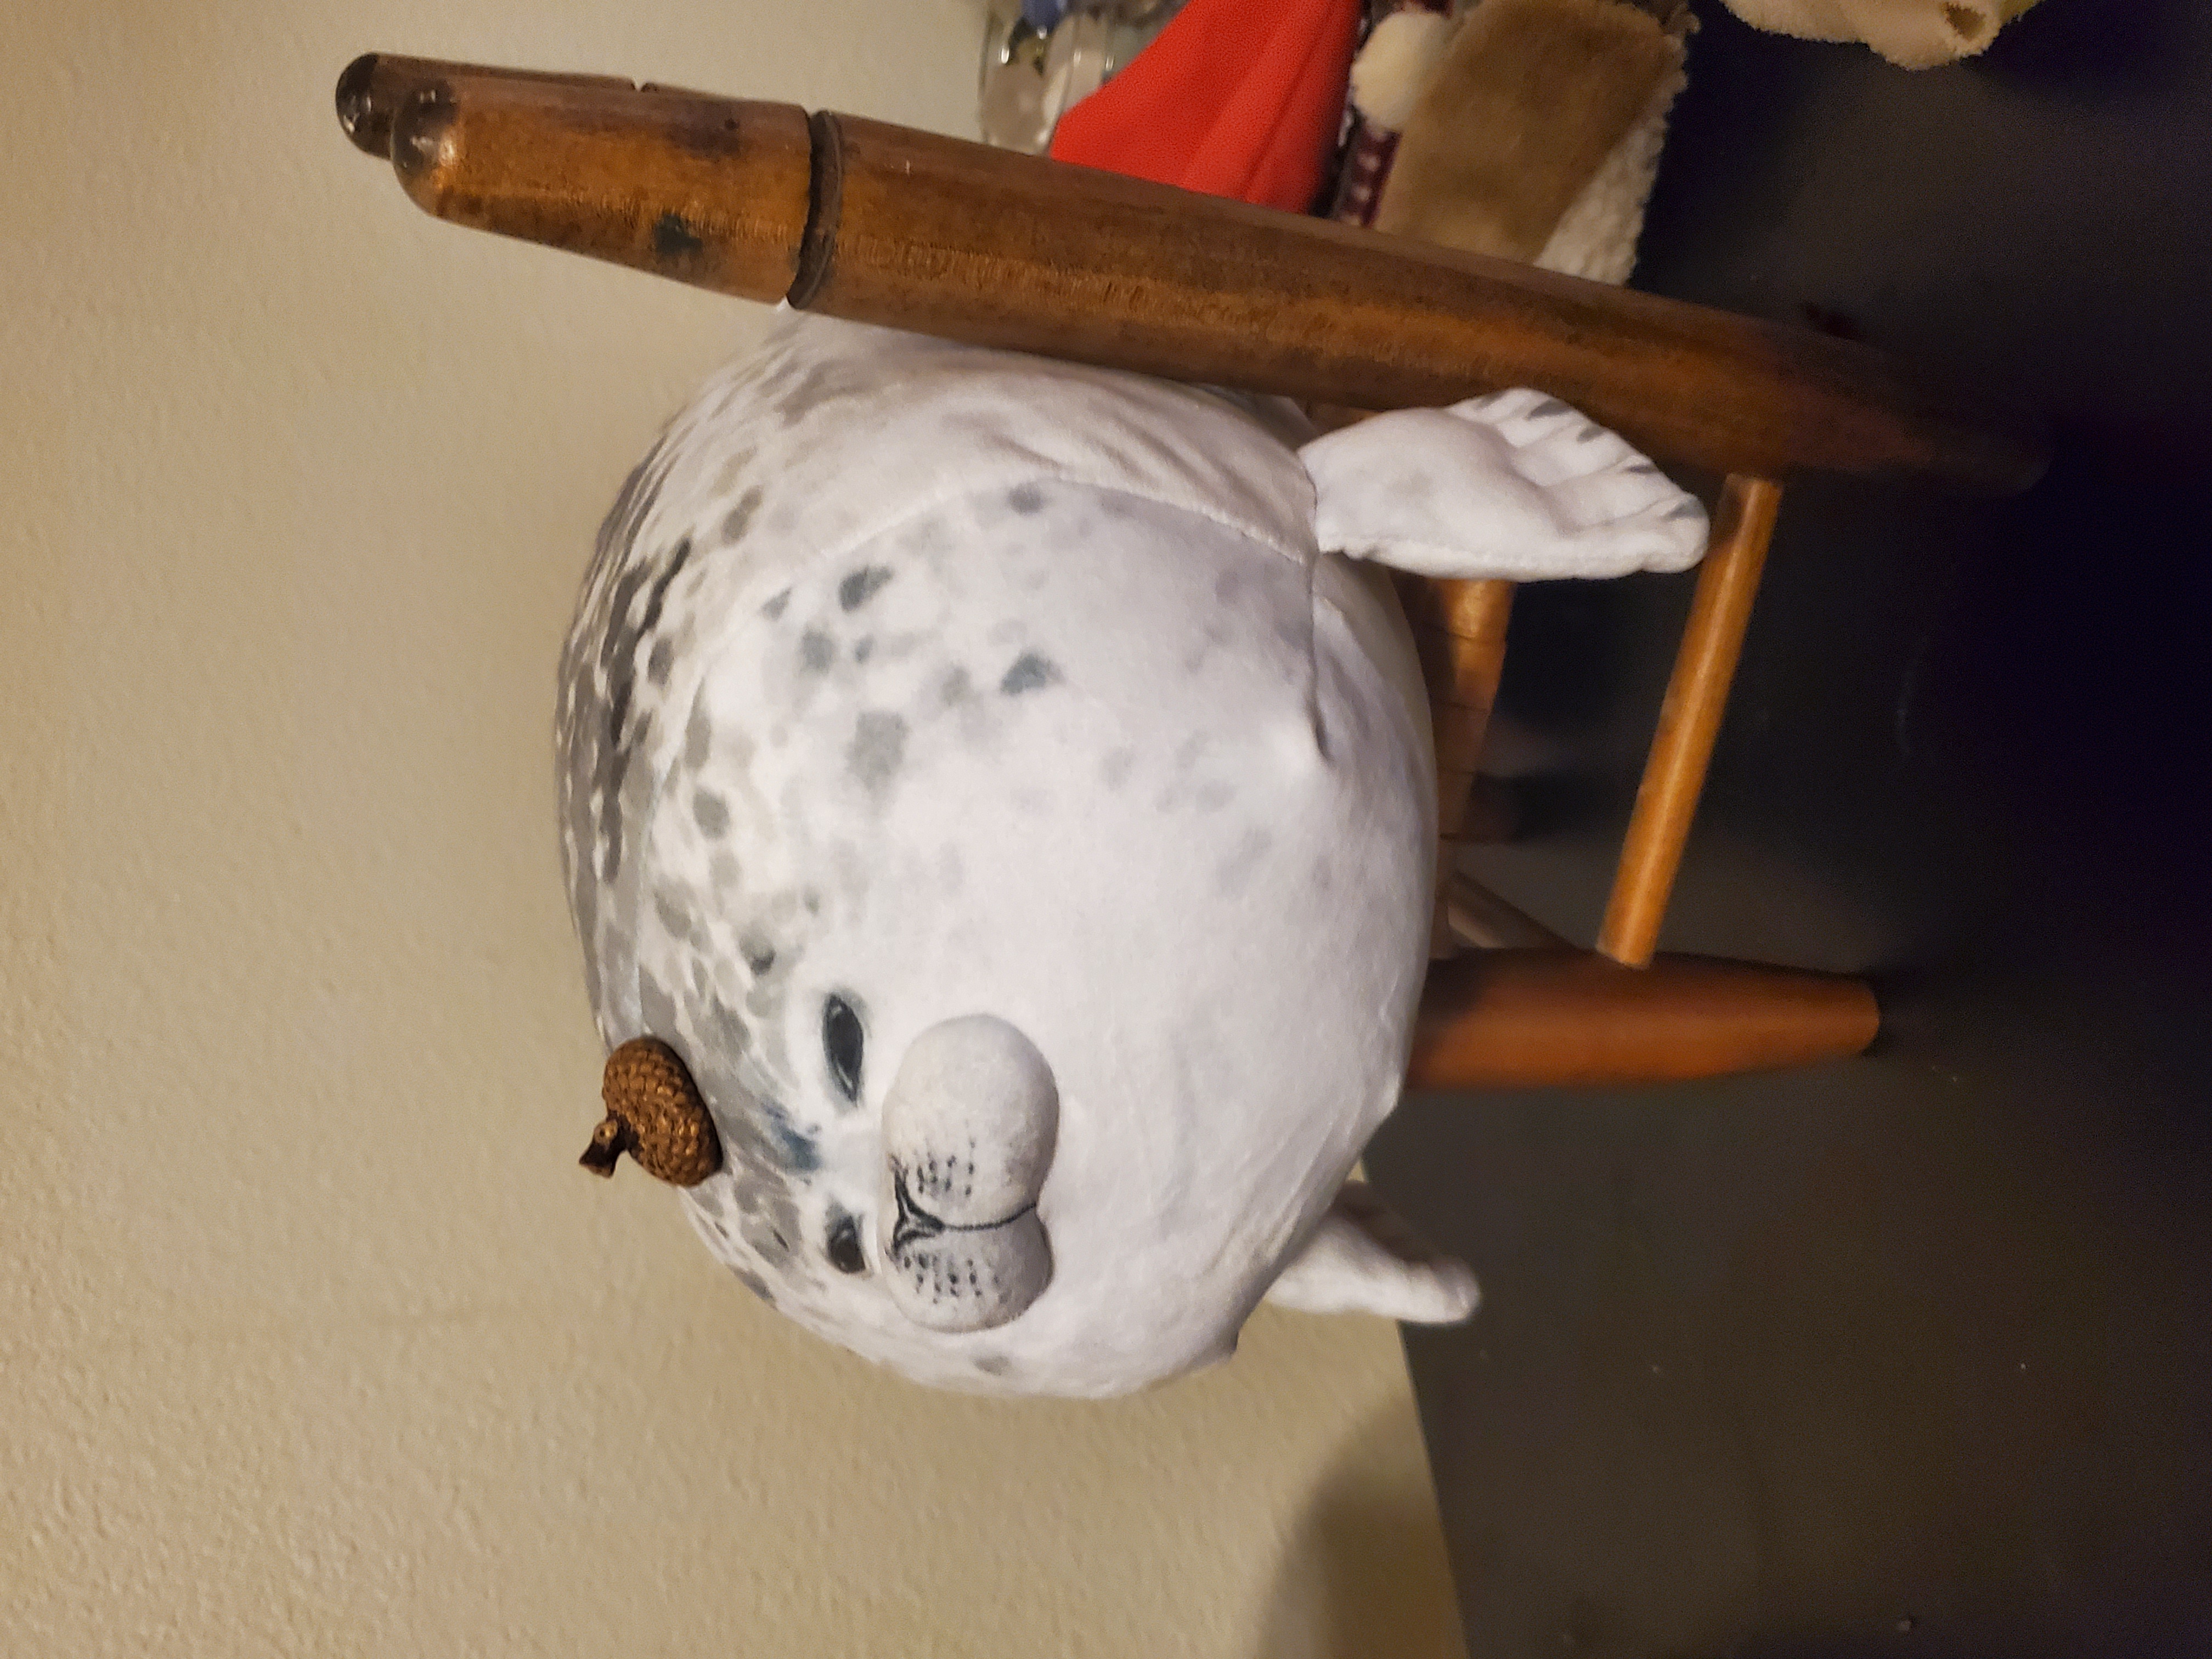 image of a rotund seal plushie. it is speckled dark gray, with little blueish white flippers stitched to its body. it has squinty little eyes and an acorn-top placed on it's head. it is also sitting on a minature chair